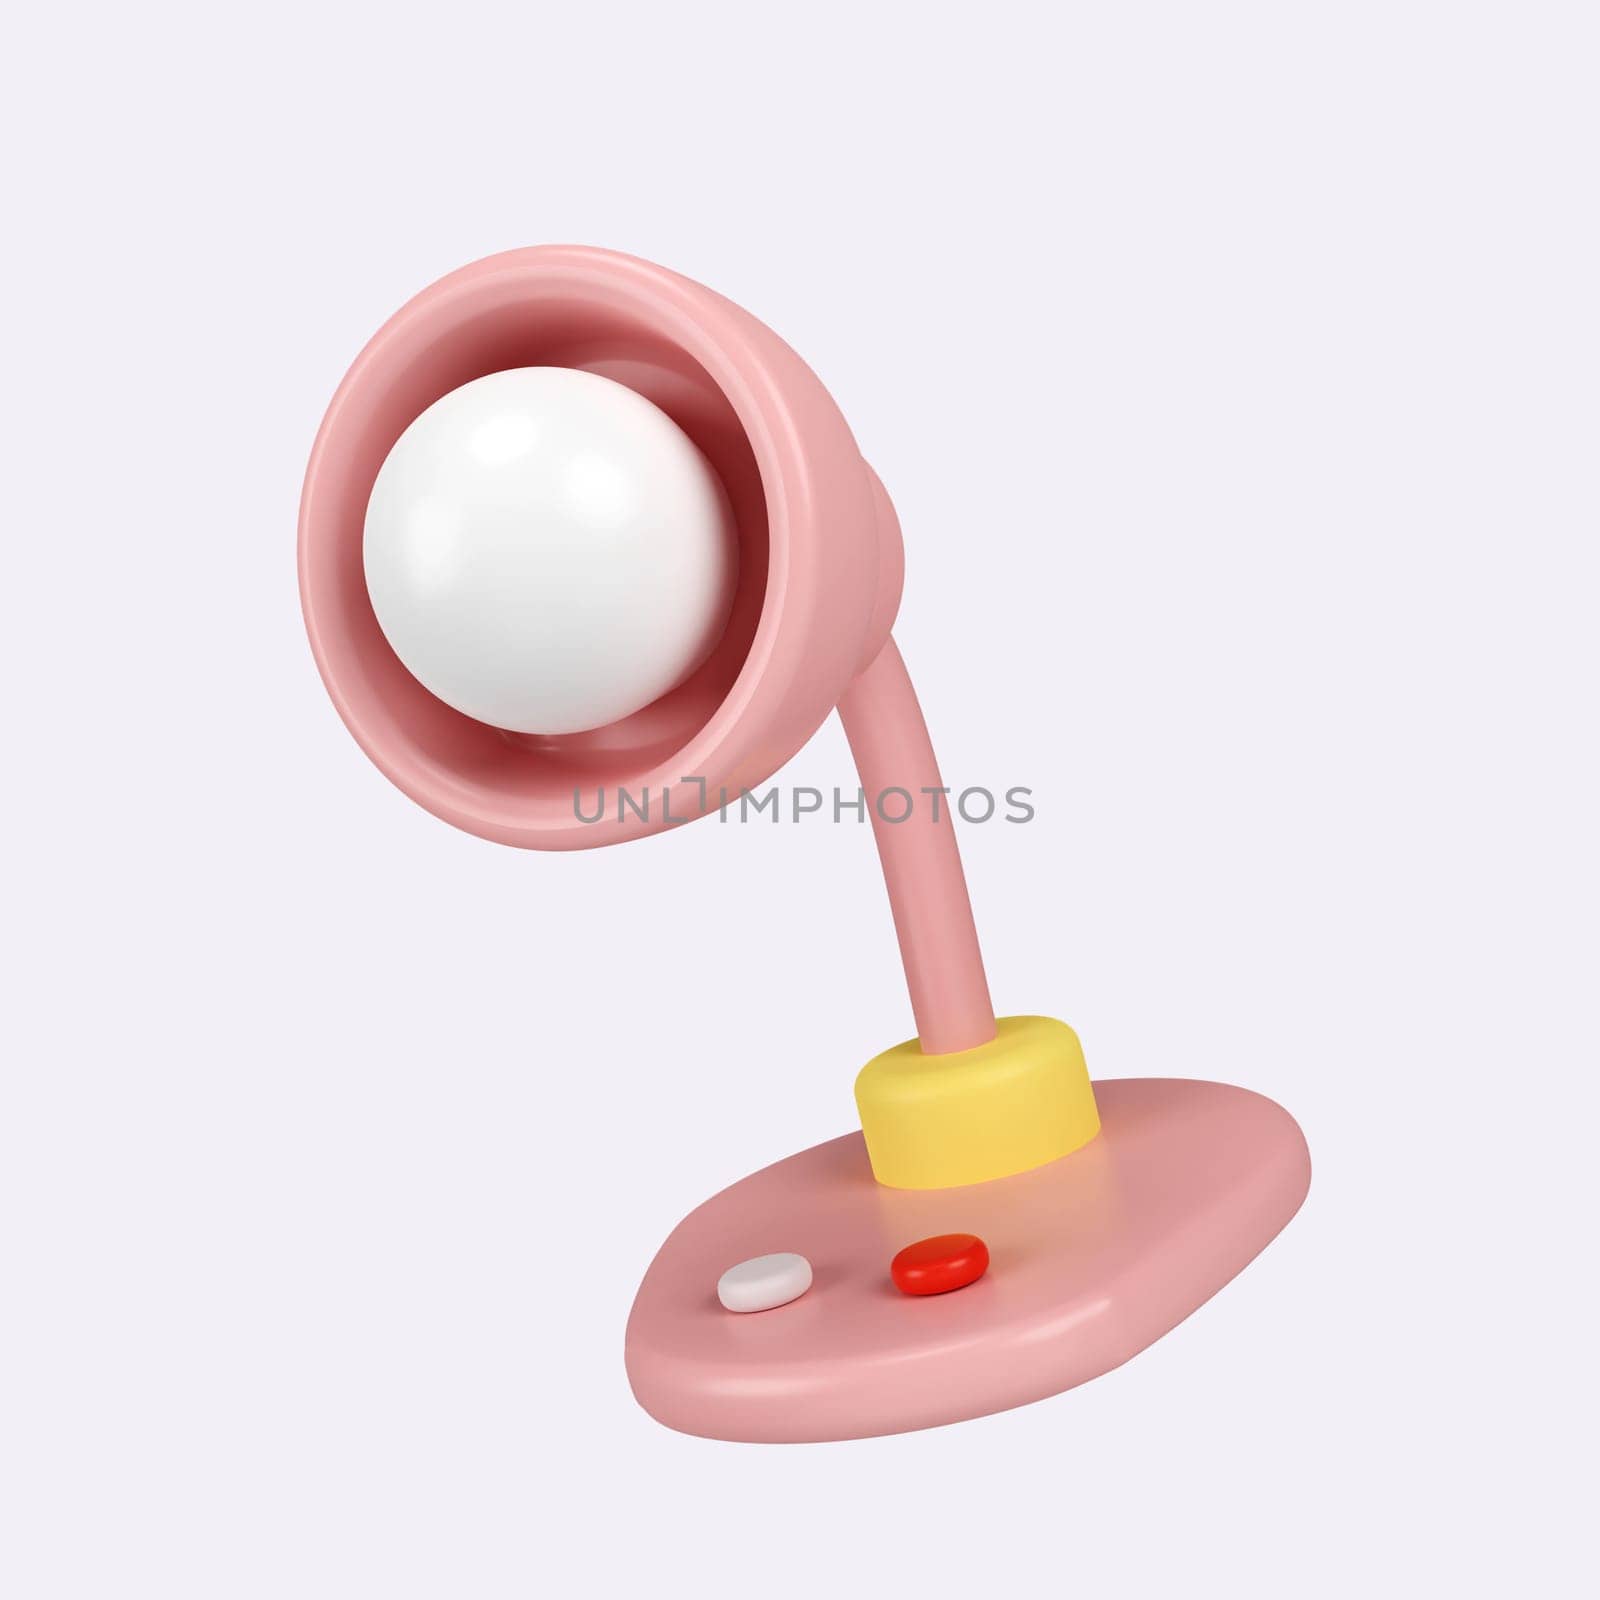 3d lamp. Back to school and education concept. isolated on background, icon symbol clipping path. 3d render illustration.